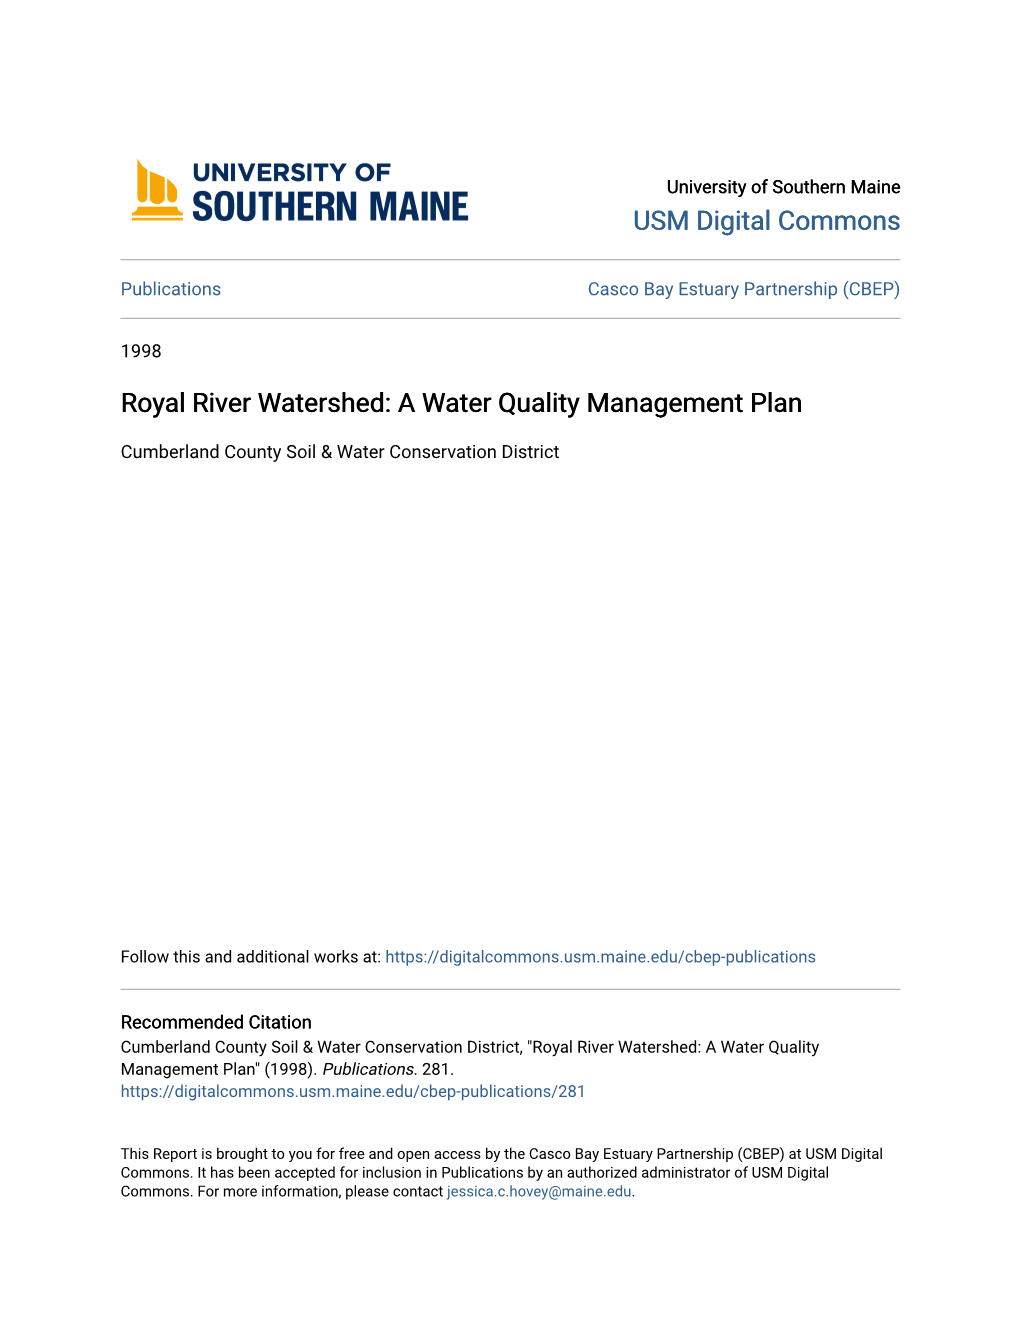 Royal River Watershed: a Water Quality Management Plan